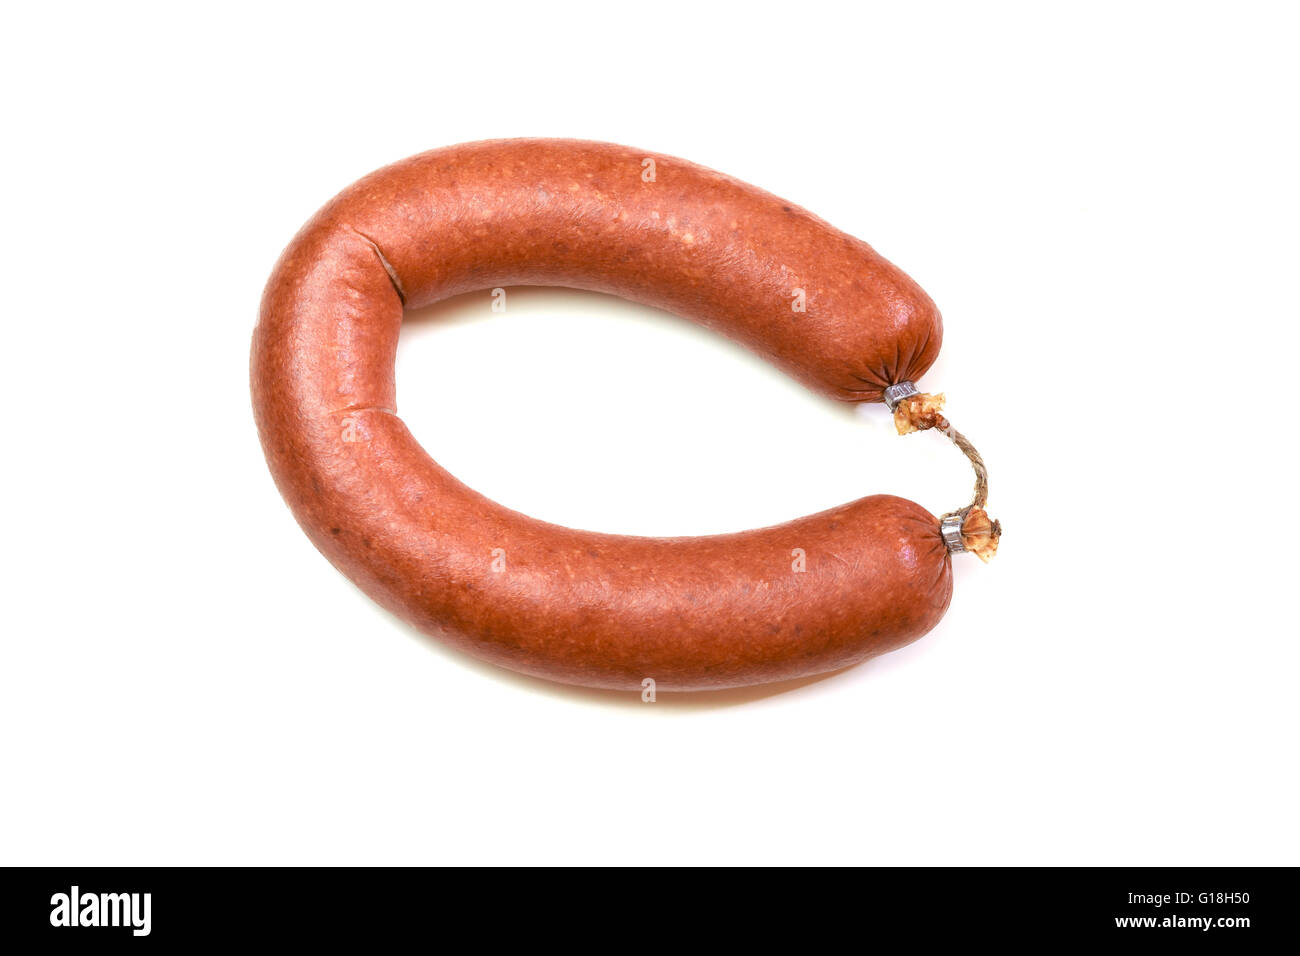 Beef sausage isolated on white background. Top view Stock Photo